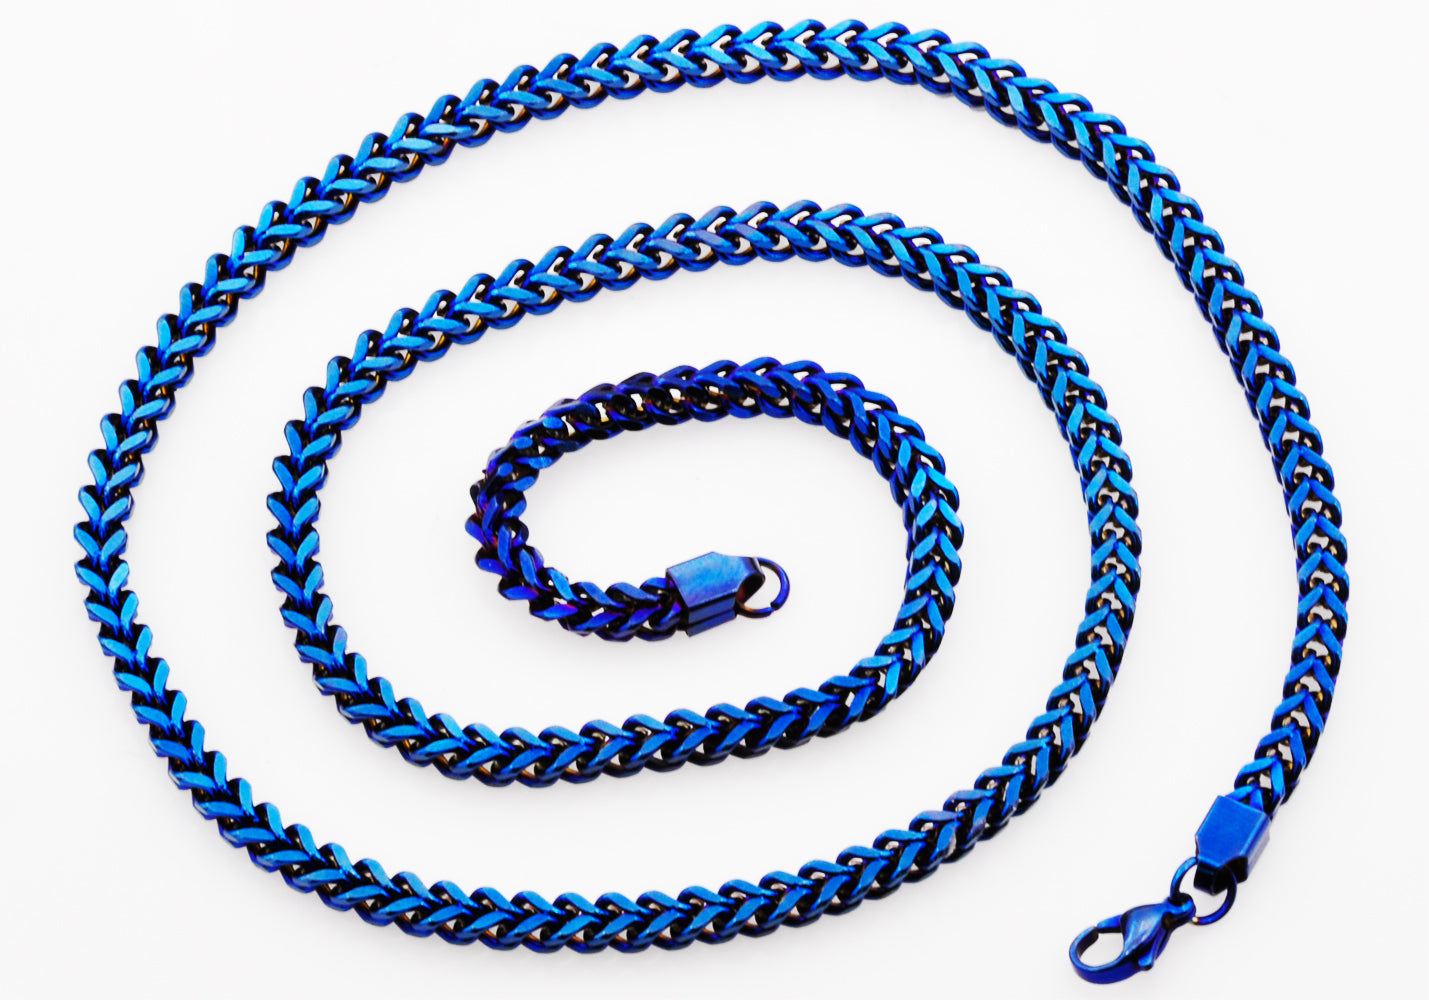 Necklaces Blue Stainless Steel Rope Chain Necklace Chn9703 4mm / 24 Wholesale Jewelry Website Unisex